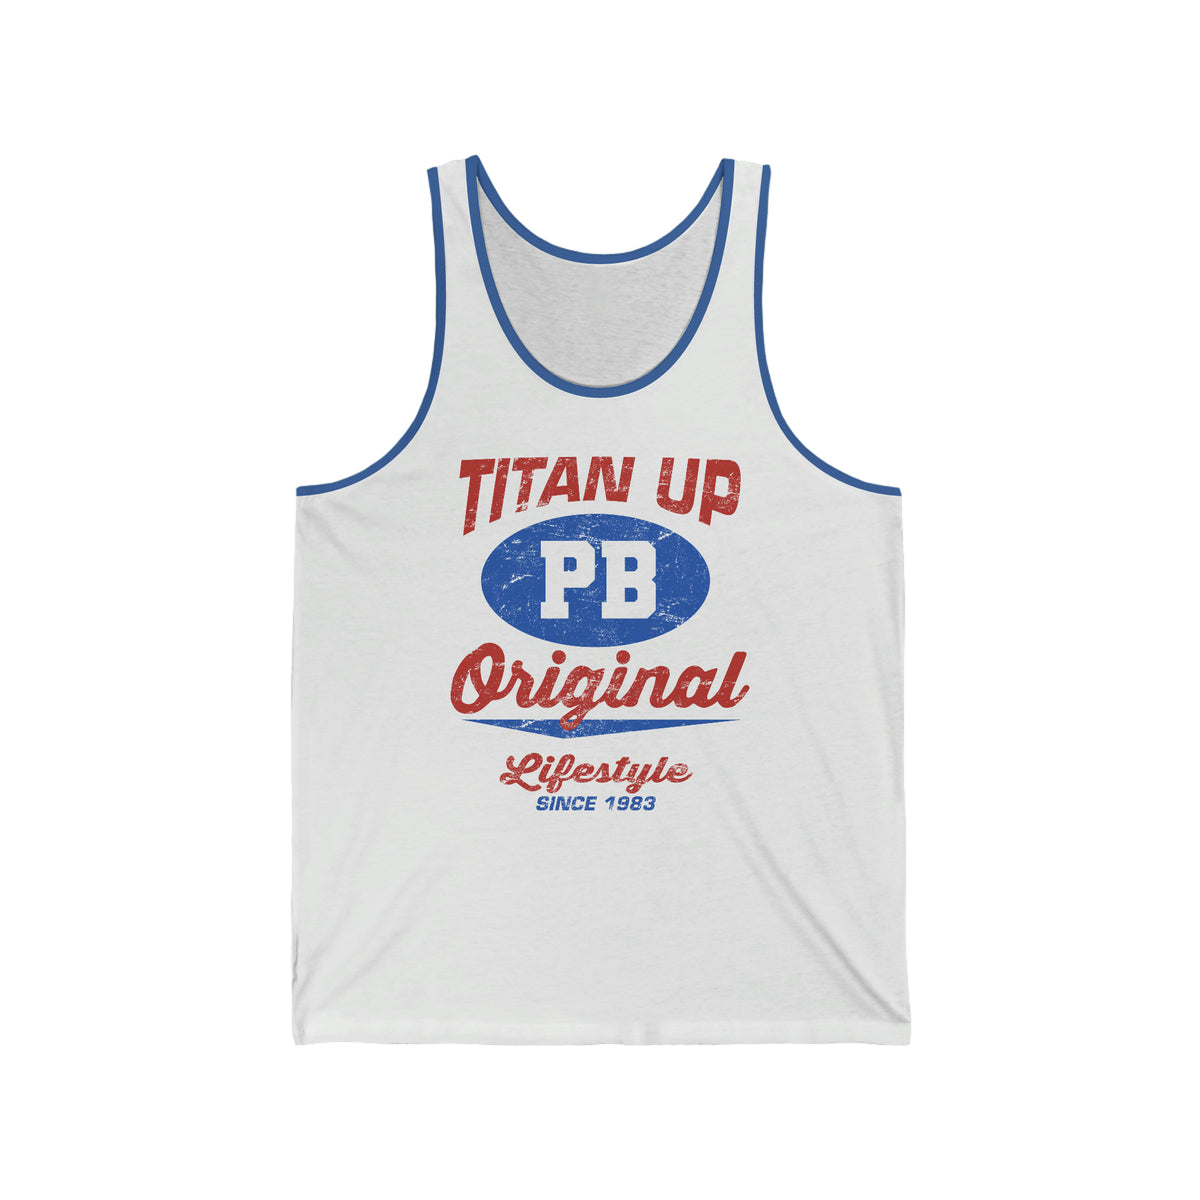 Titan Up Tank – MikeOHearnLifestyle.com